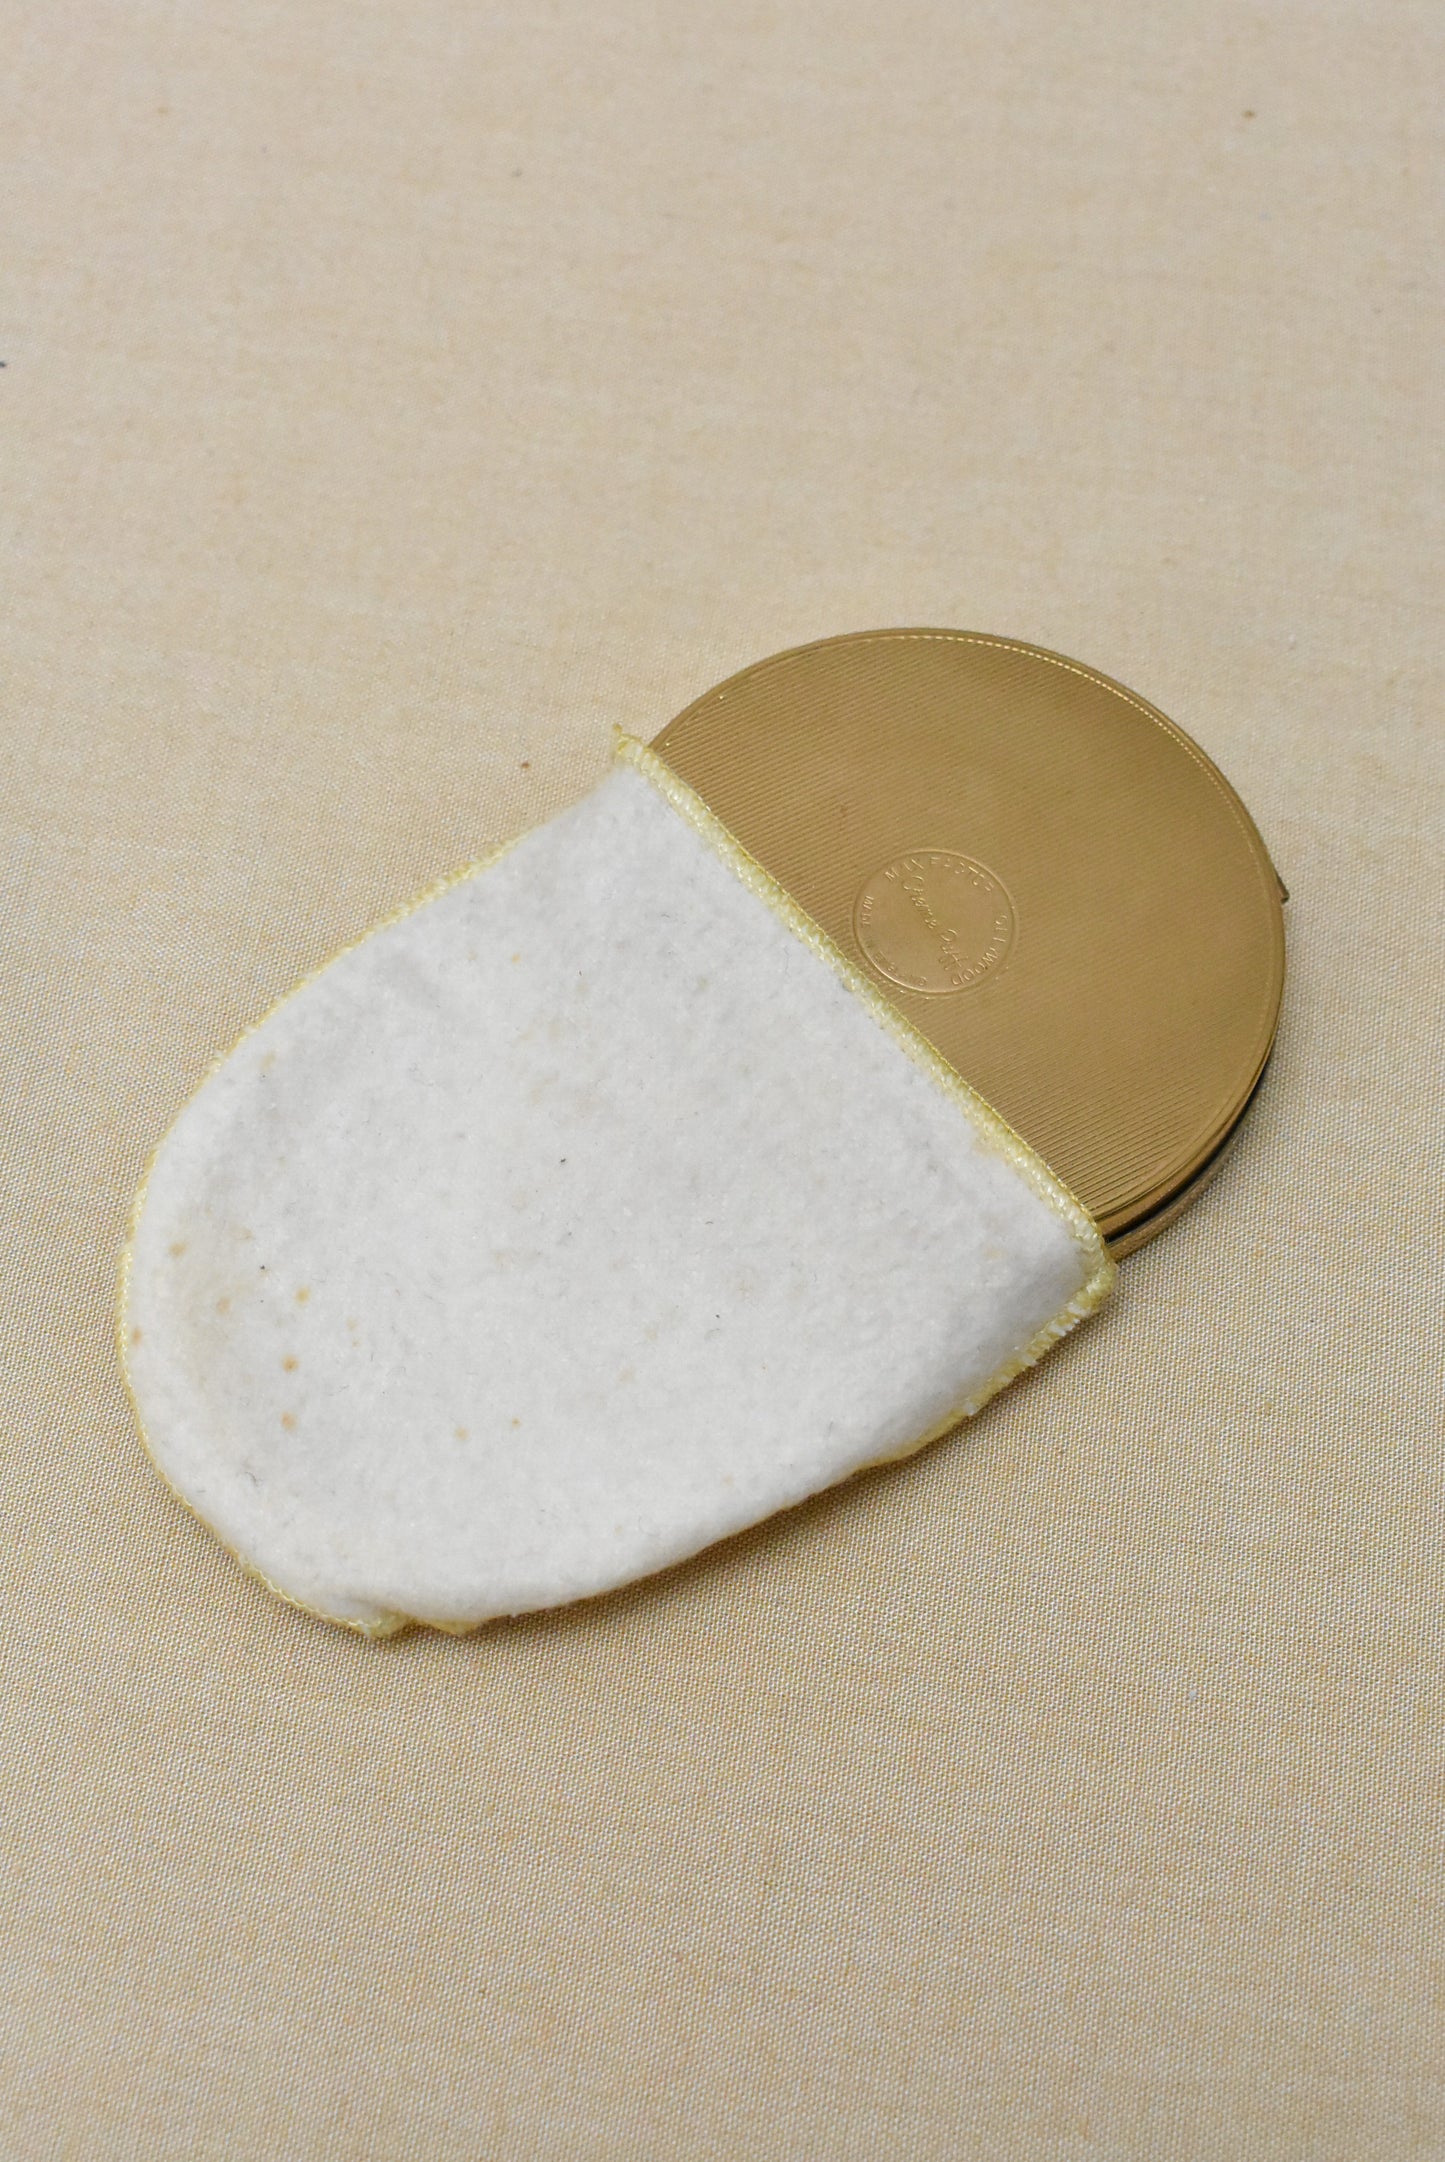 Vintage Revlon 'Love Pat' pressed powder in clamshell compact with mirror